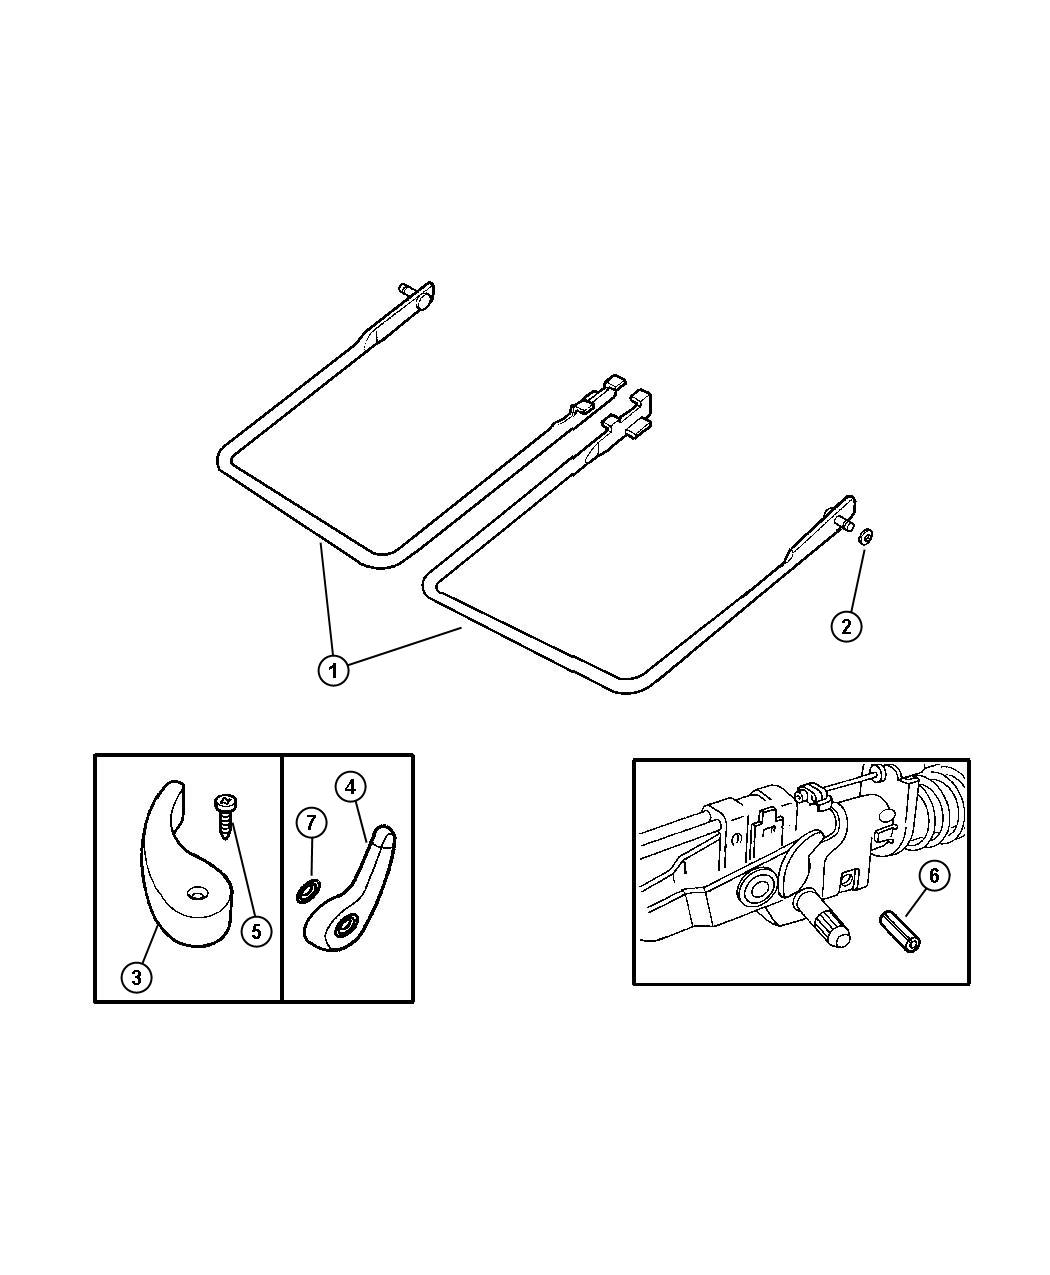 Handles and Attaching Parts. Diagram